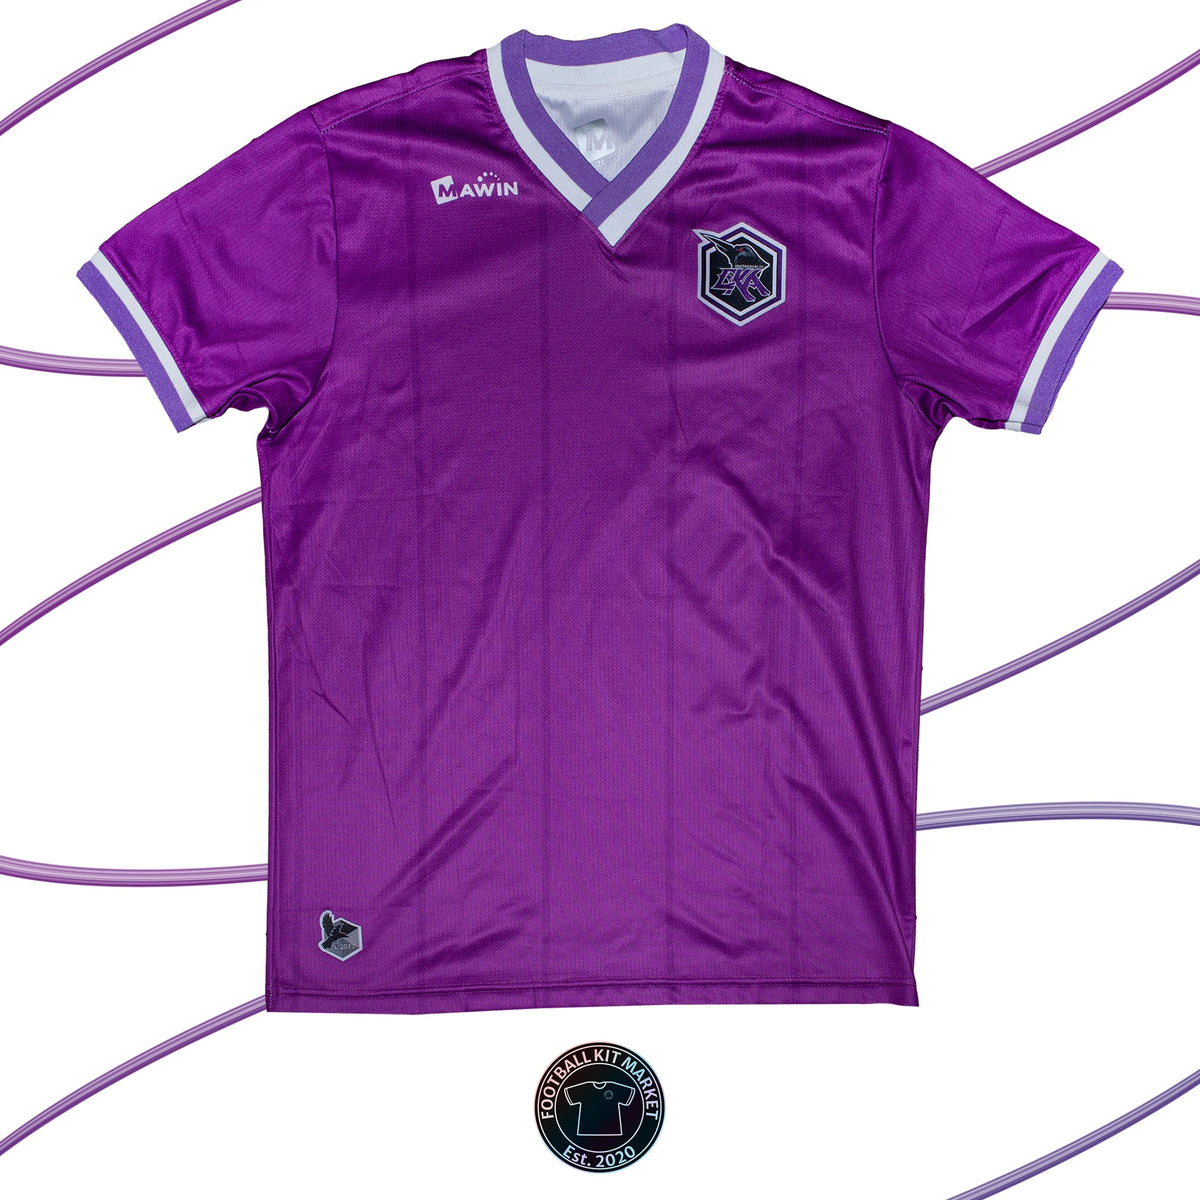 Genuine NONTHABURI FC Away (2017) - MAWIN (L) - Product Image from Football Kit Market